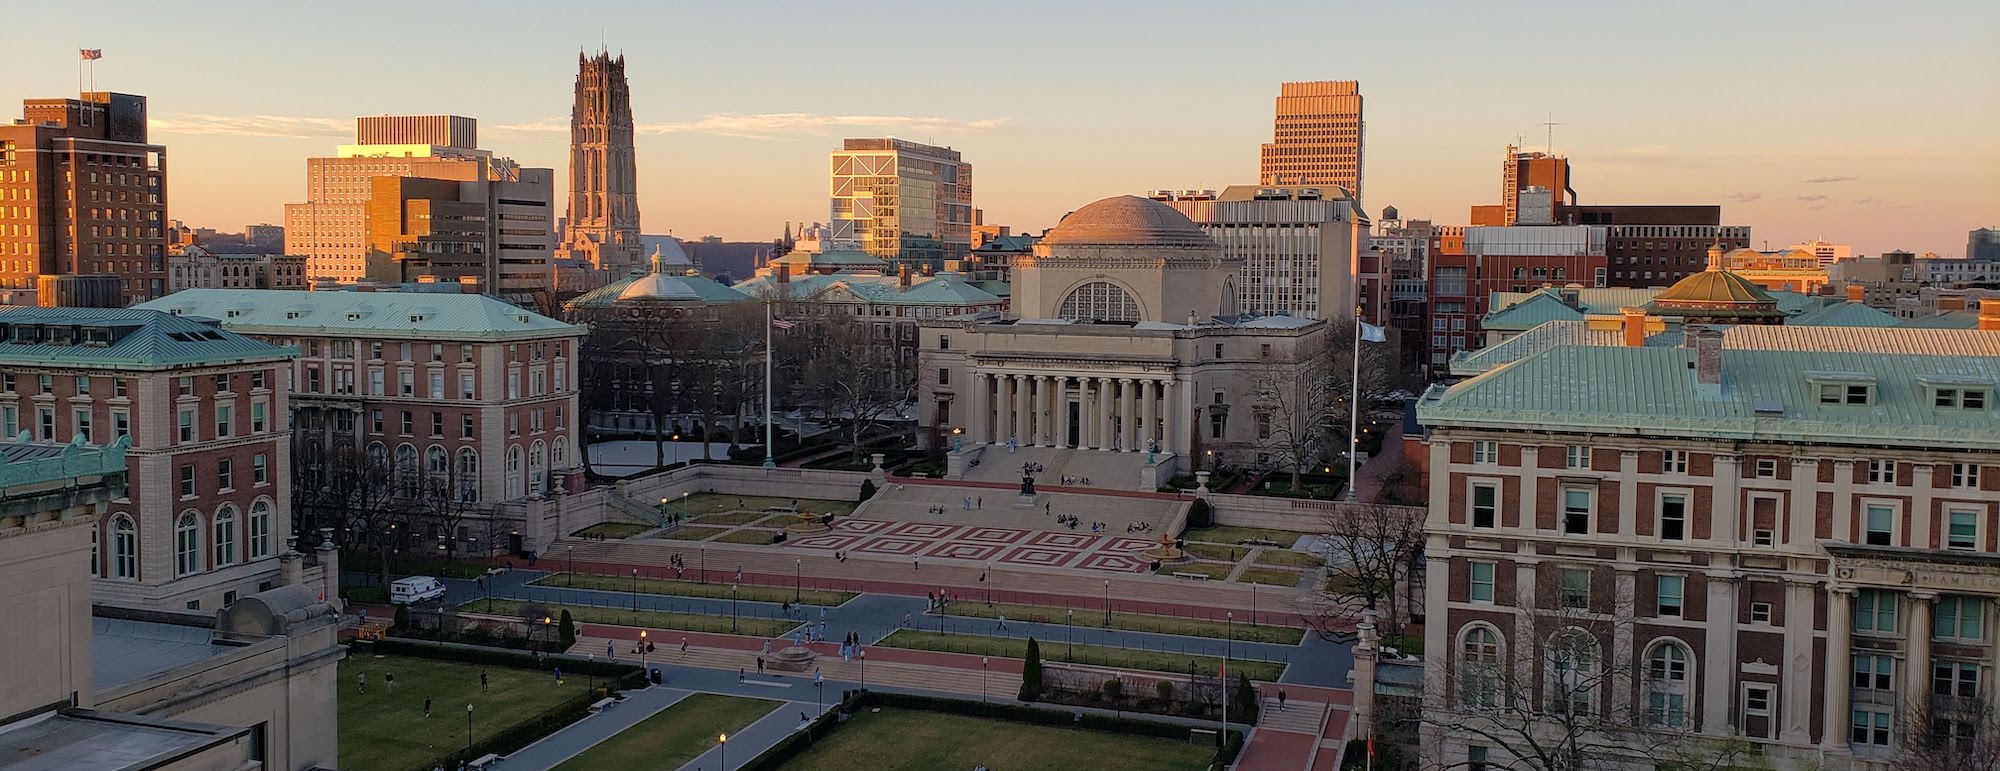 Columbia No Longer No. 2 University After Being “Unranked” By U.S. News & World Report